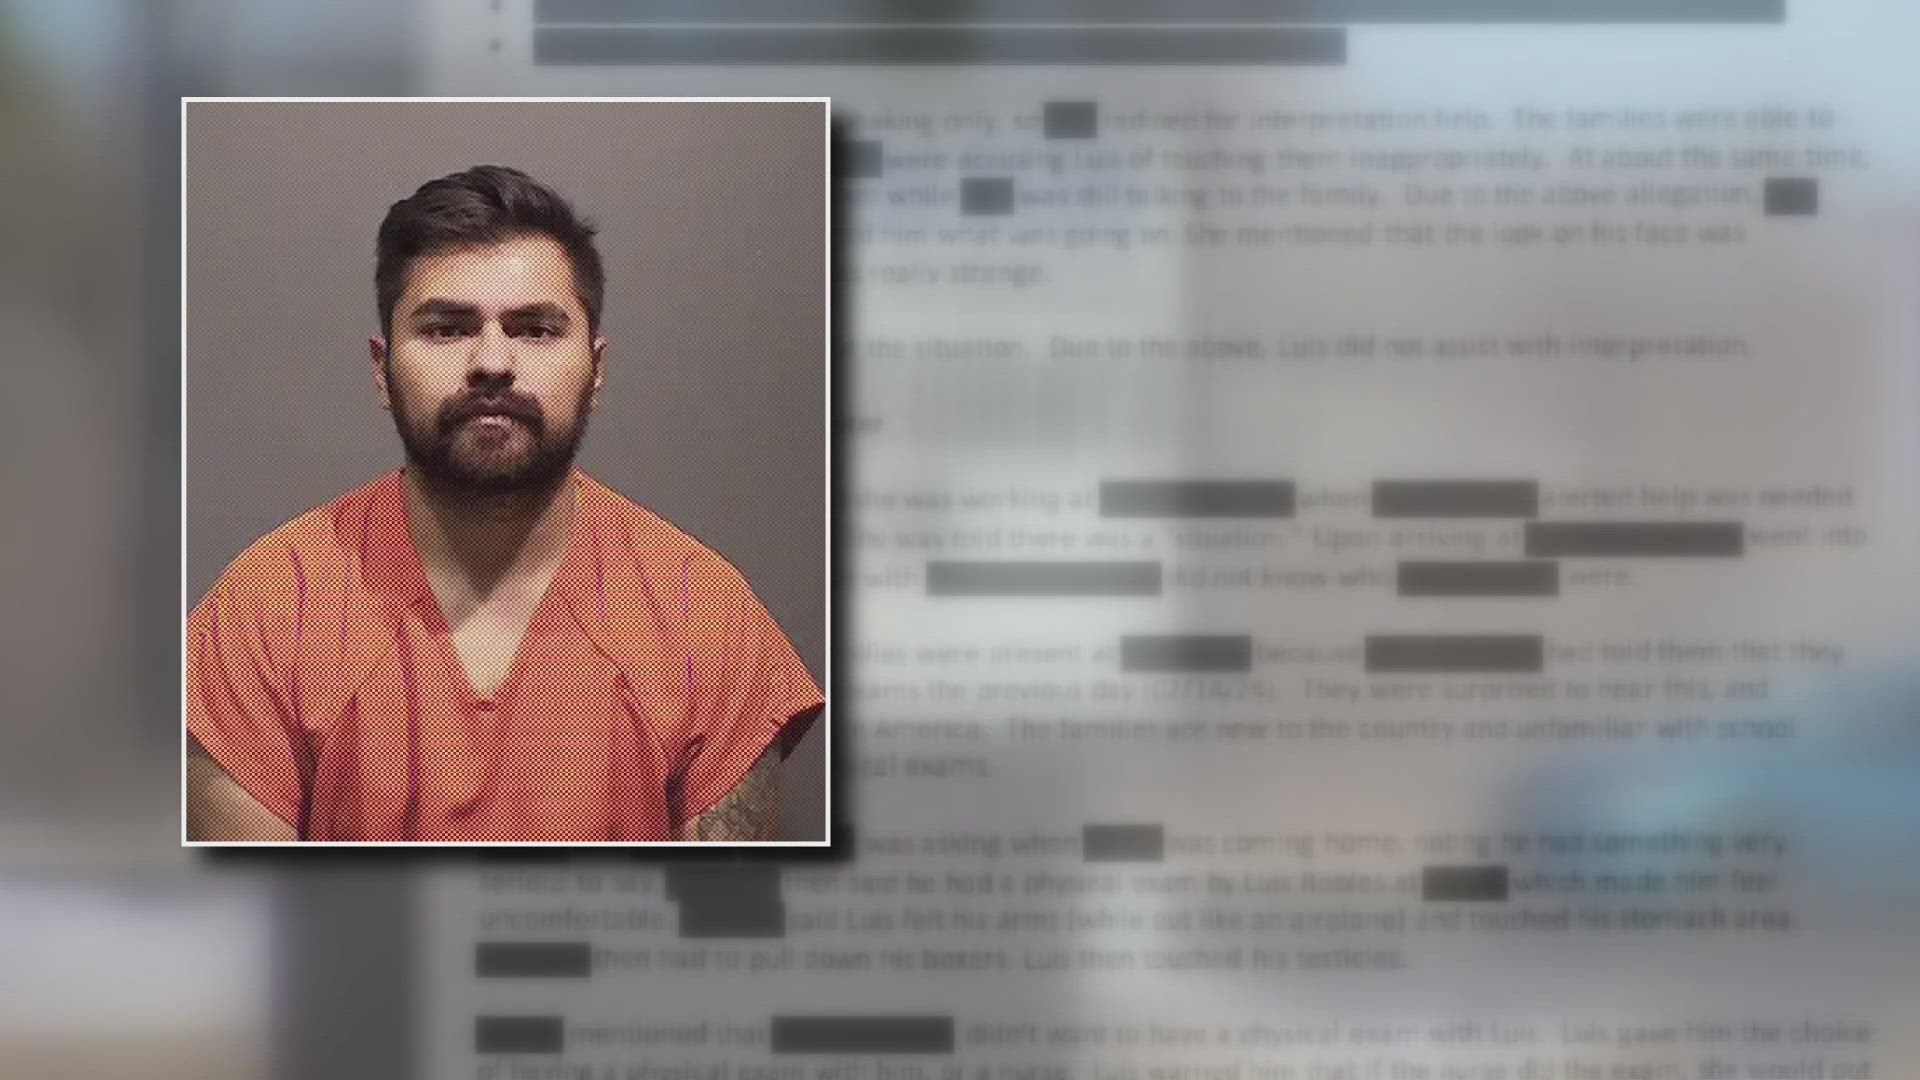 Court records detail assault allegations against Luis Robles-Luevanos, a family liaison at Creighton Middle School. 9NEWS found he has three prior arrests.